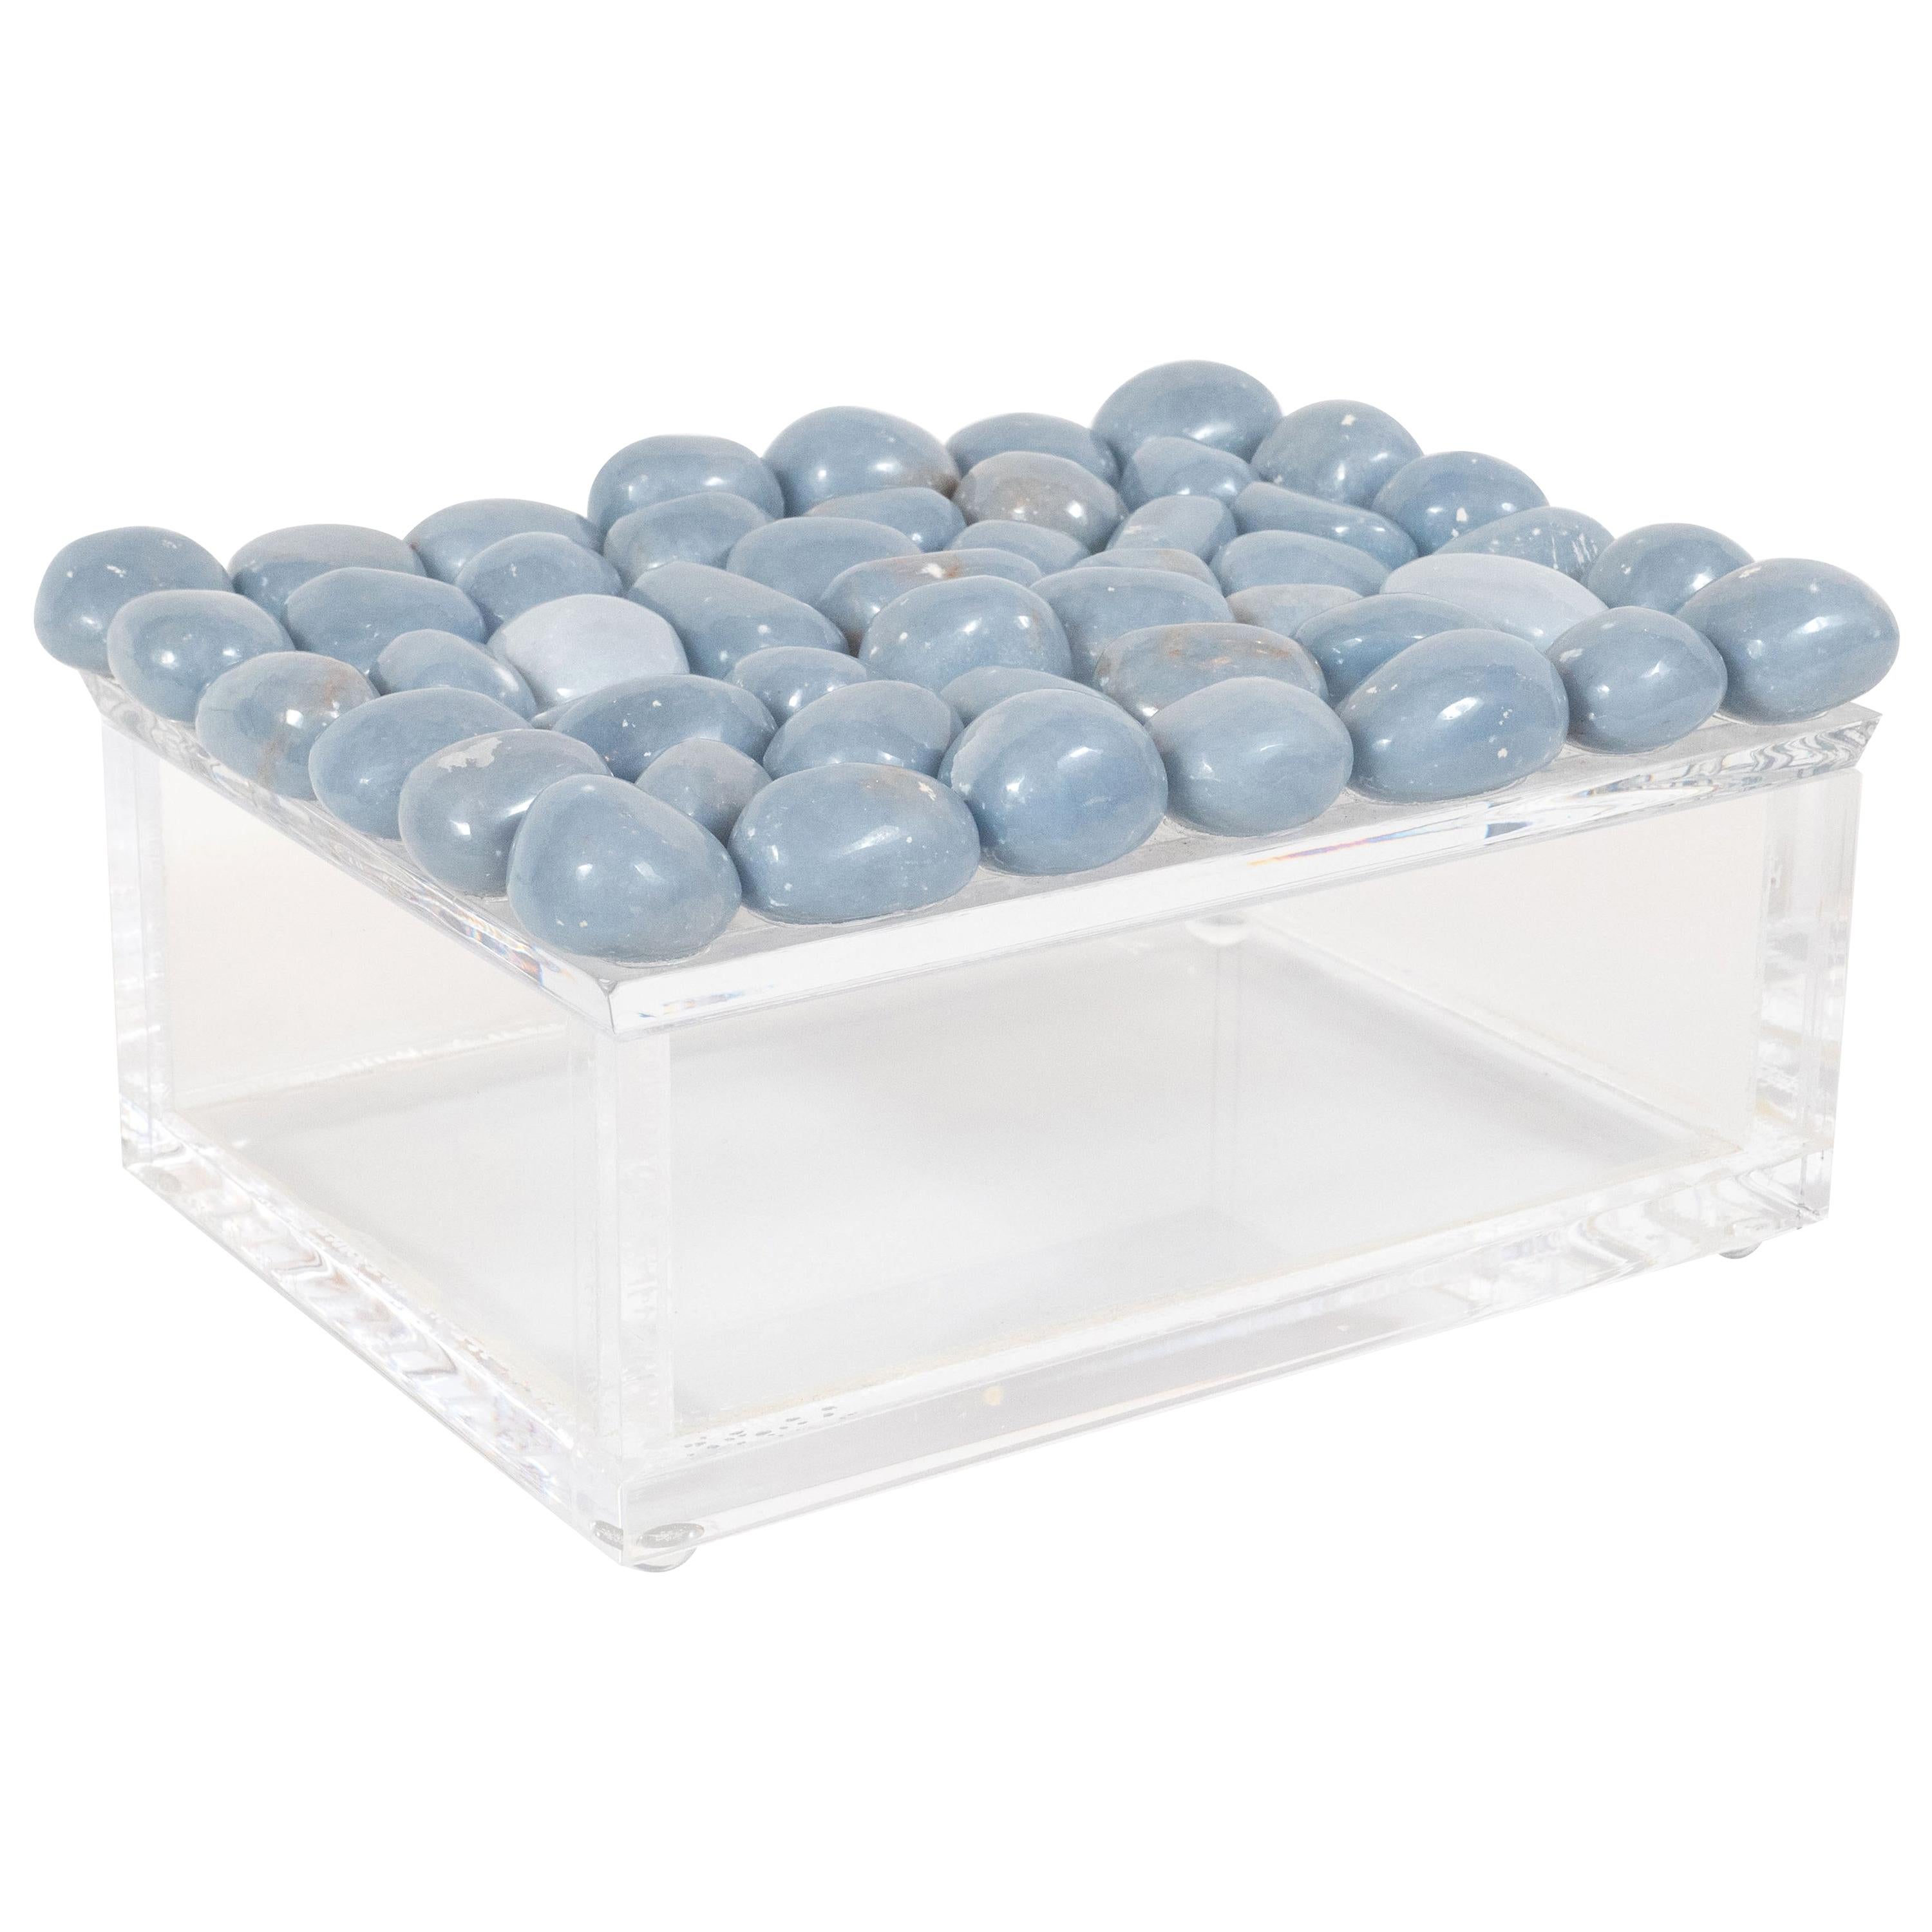 Modernist Volumetric Rectangular Lucite Box with Muted Blue Stone Detailing